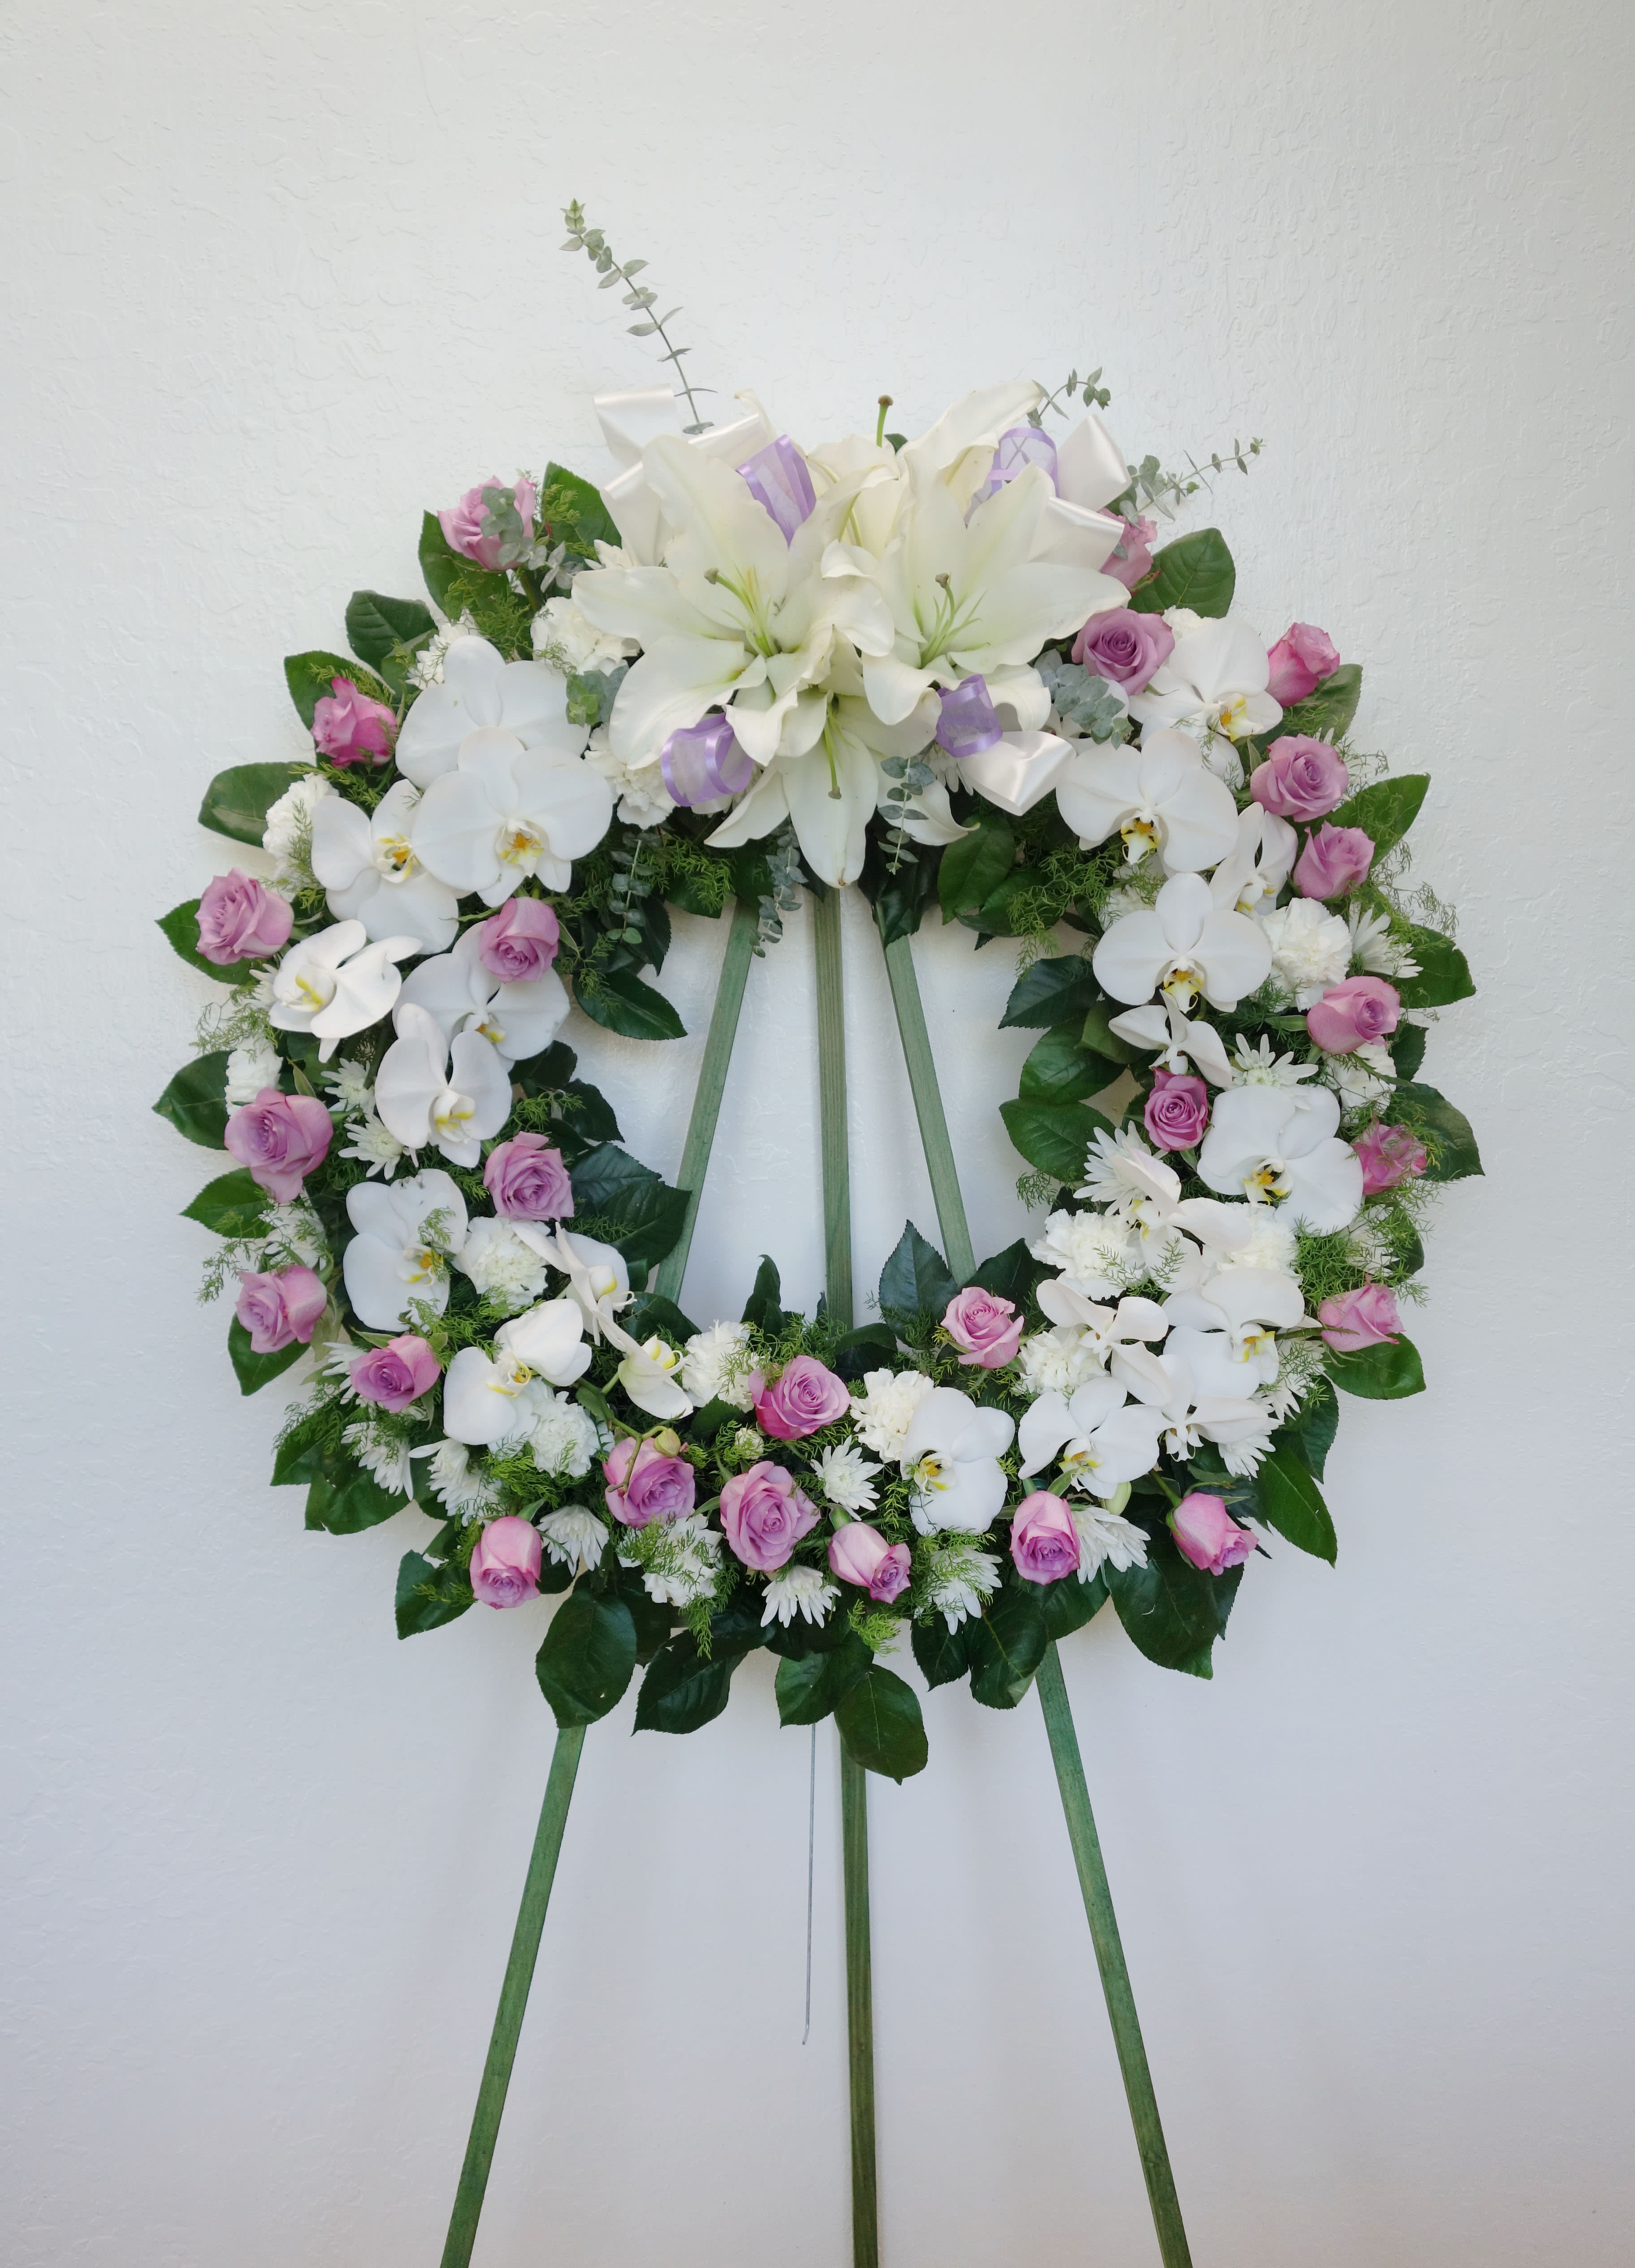 OW#01 Purple Rose Orchid Wreath  - Circle wreath of white phalaenopsis orchids, white asiatic lilies, white carnations, and purple roses.   Standard: 28&quot; Diameter Deluxe: 32&quot; Diameter (as shown)